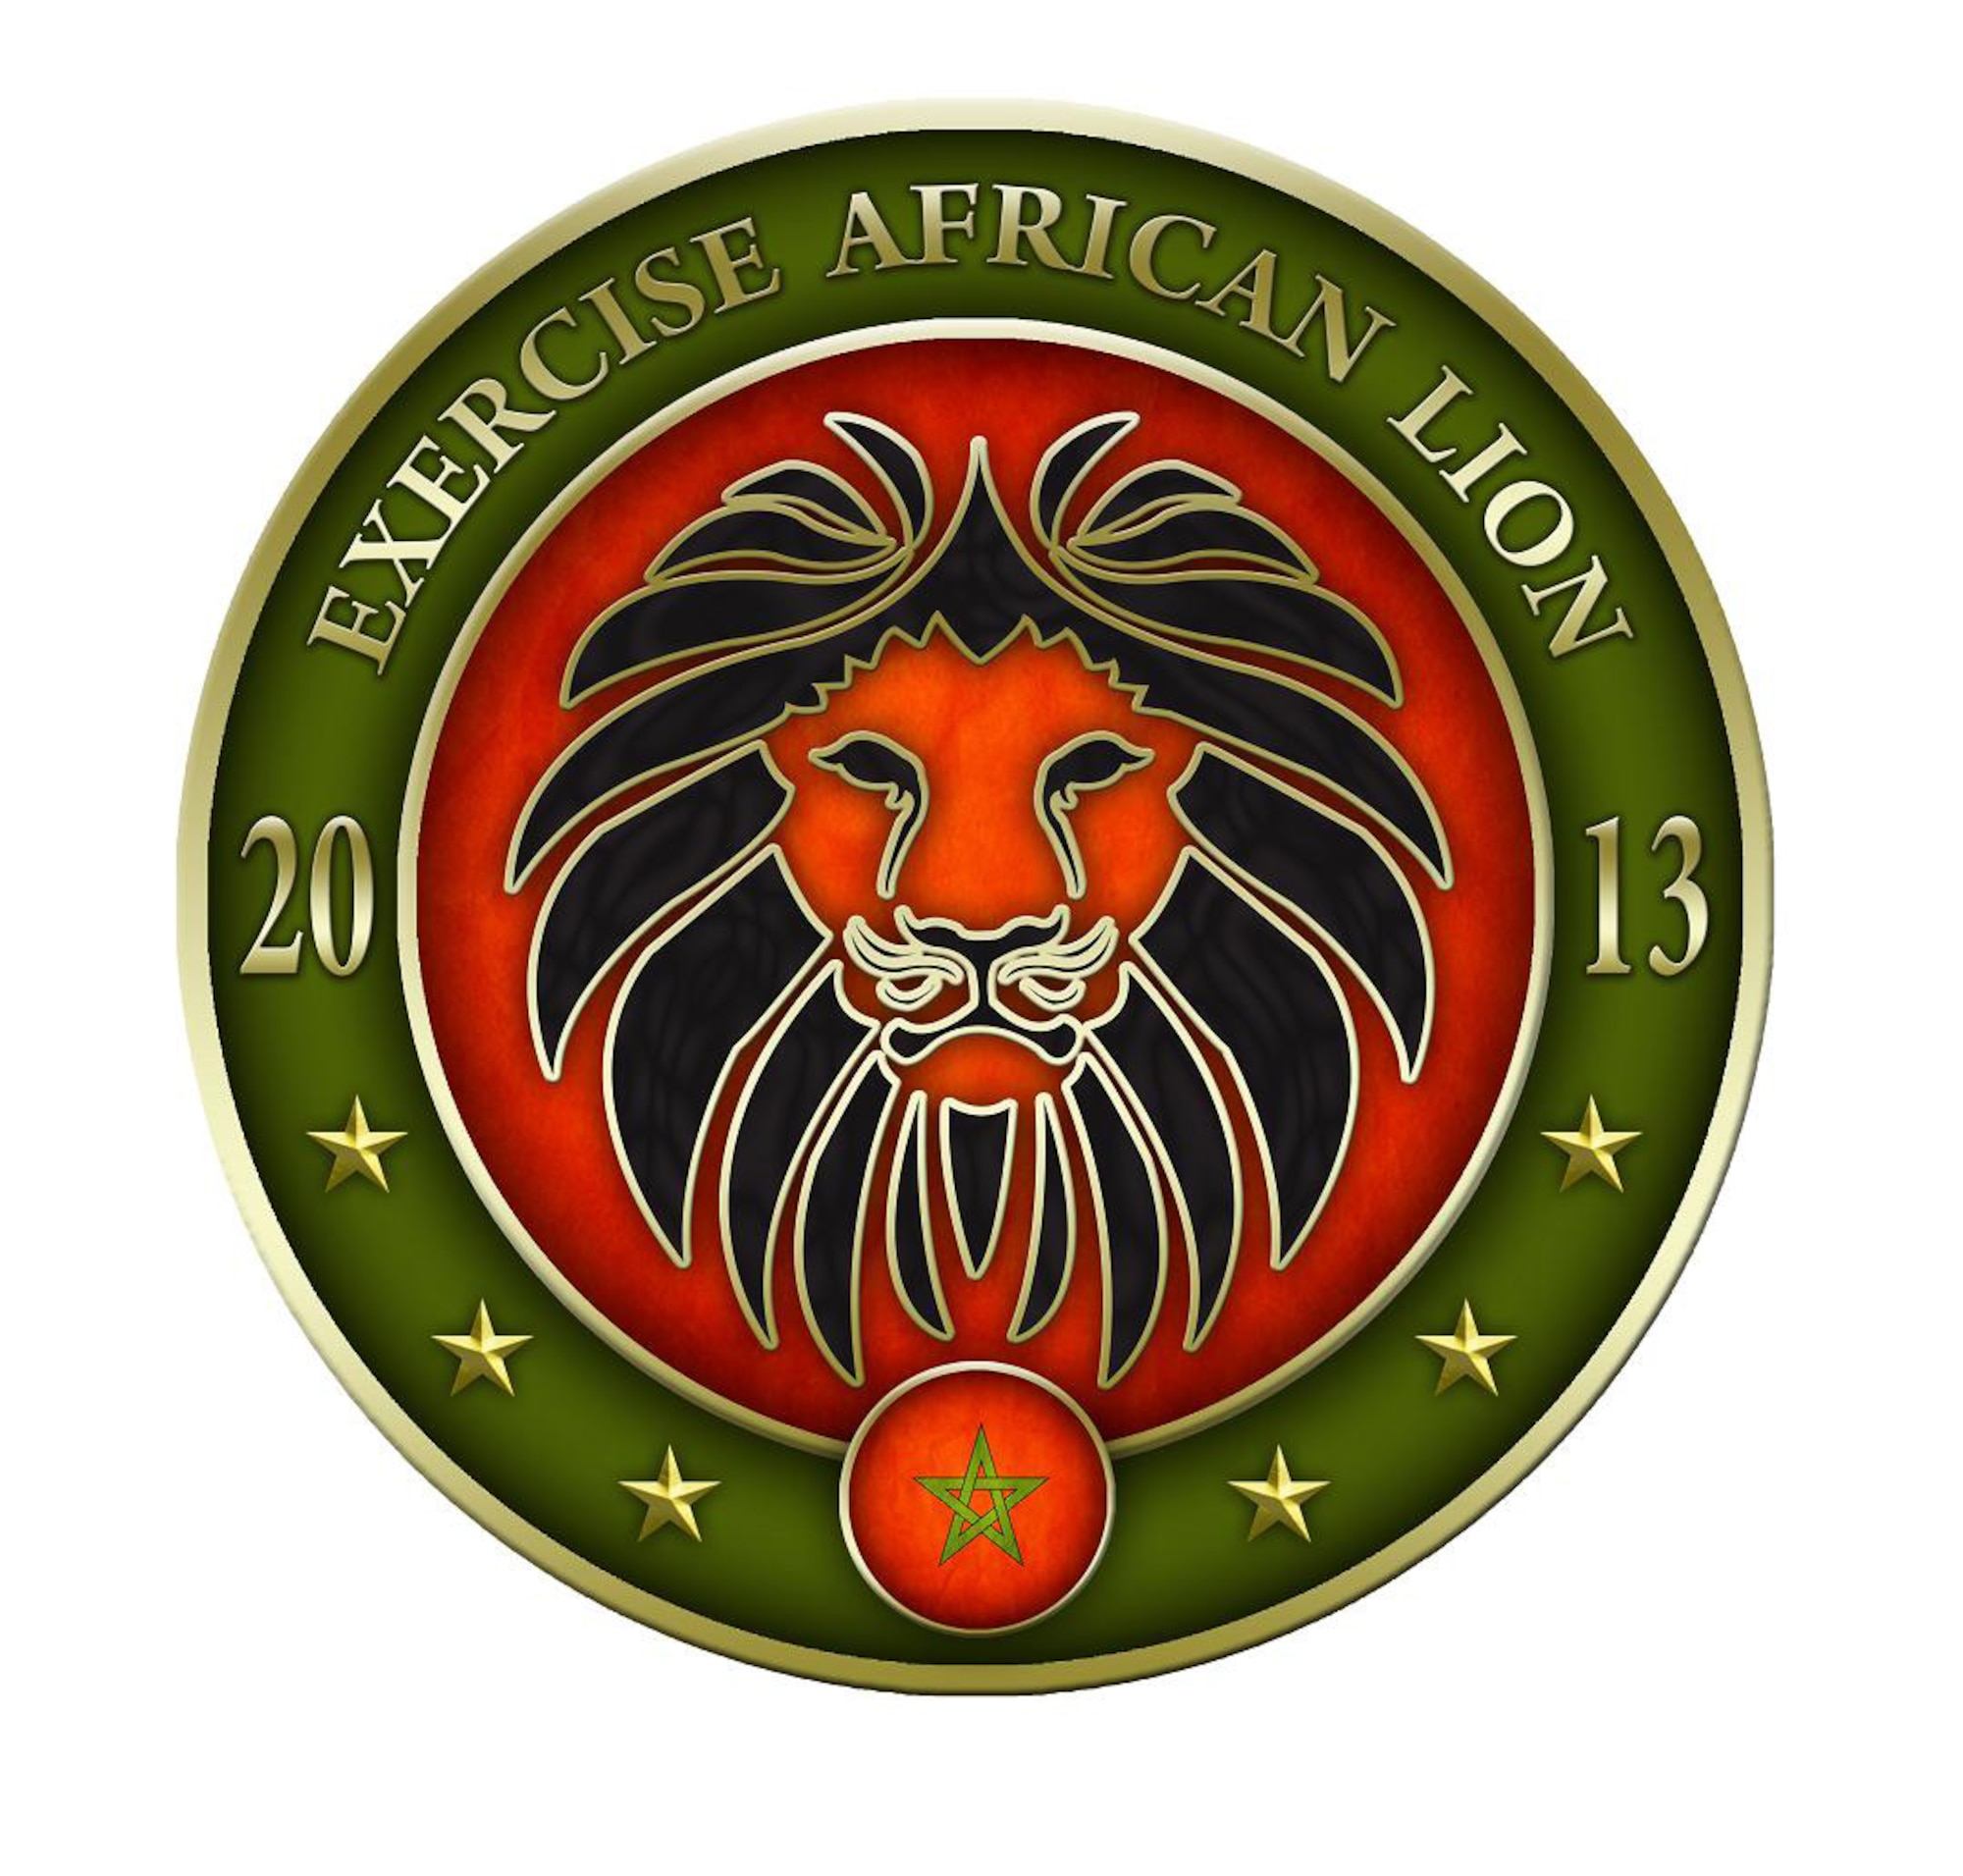 African Lion is an annually scheduled, bilateral U.S. and Moroccan sponsored exercise designed to improve interoperability and mutual understanding of each nation's tactics, techniques and procedures. This year, the Air Force Reserve's 55th Combat Communications Squadron, Robins Air Force Base, Ga., was selected to provide communications support for the exercise. 